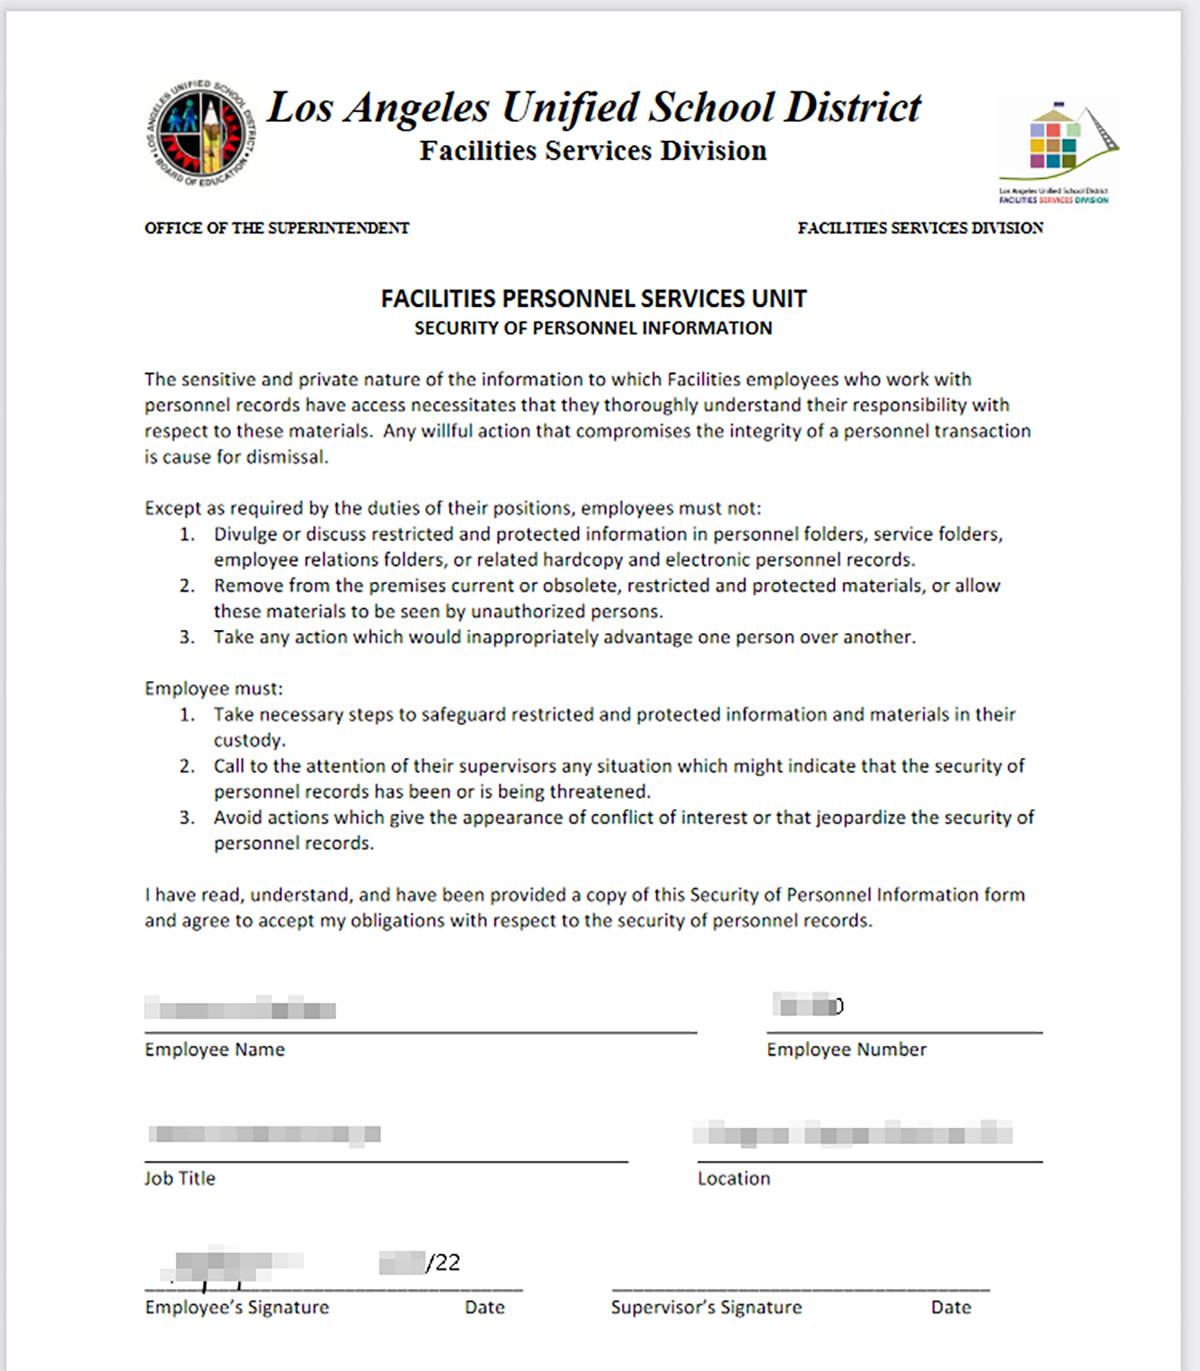 An employment contract from the Los Angeles School District